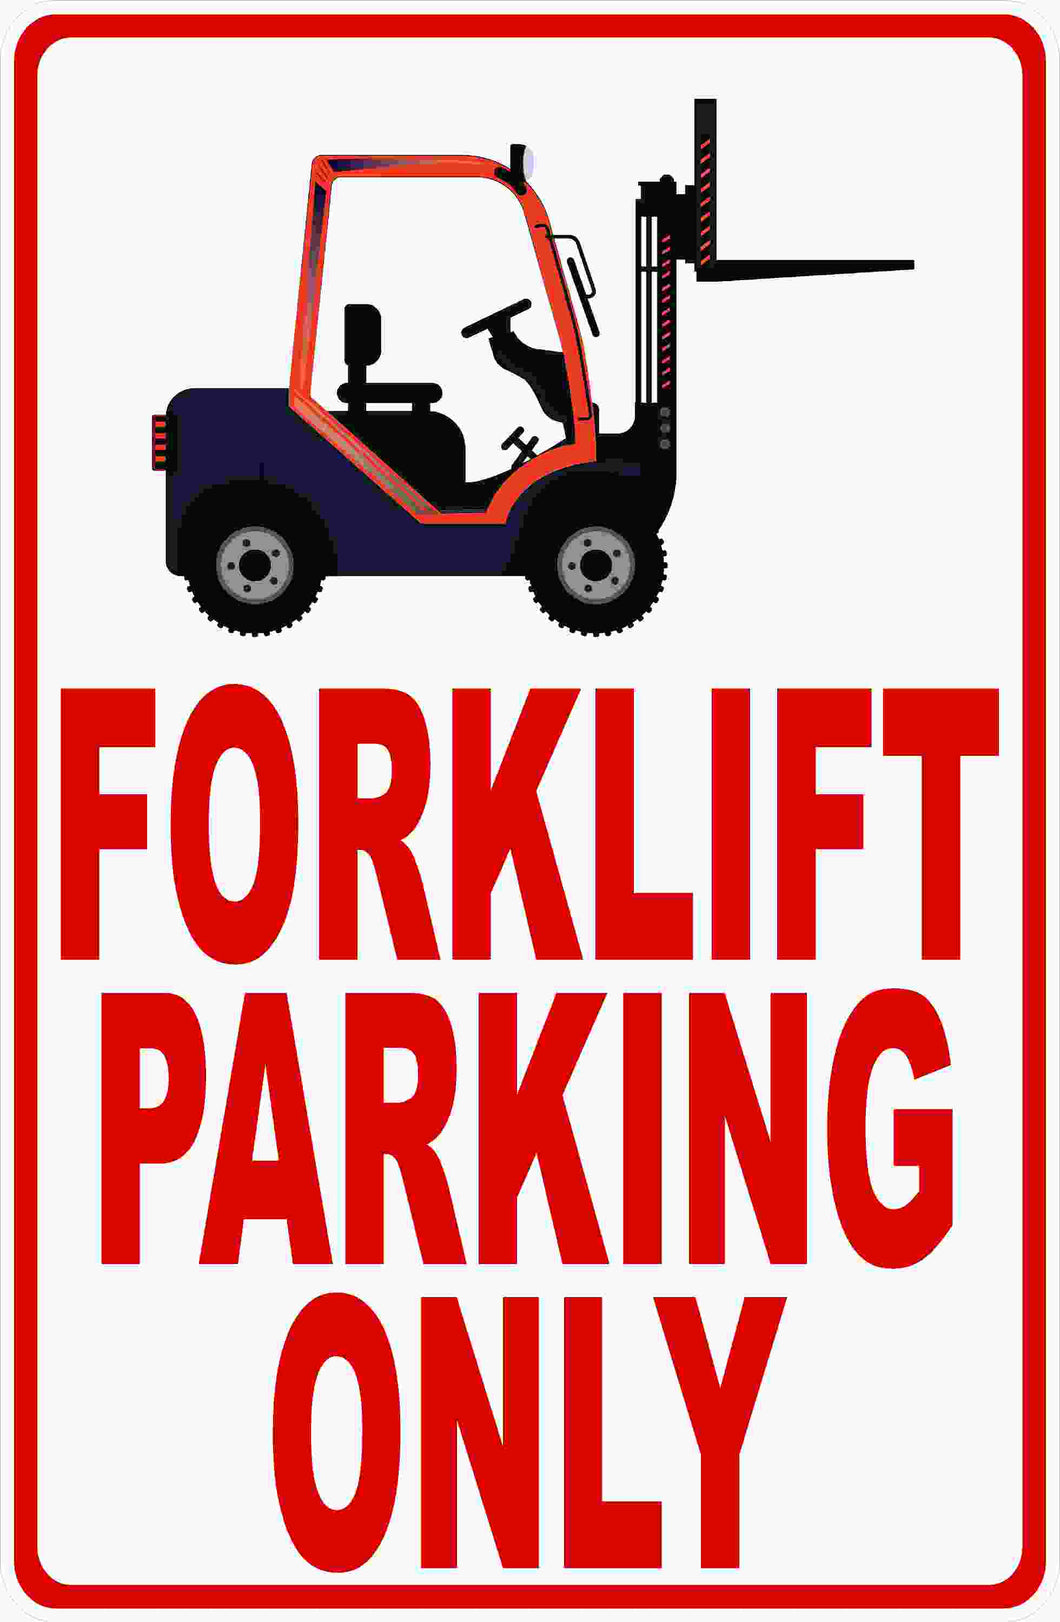 Forklift Parking Only Sign by Sala Graphics